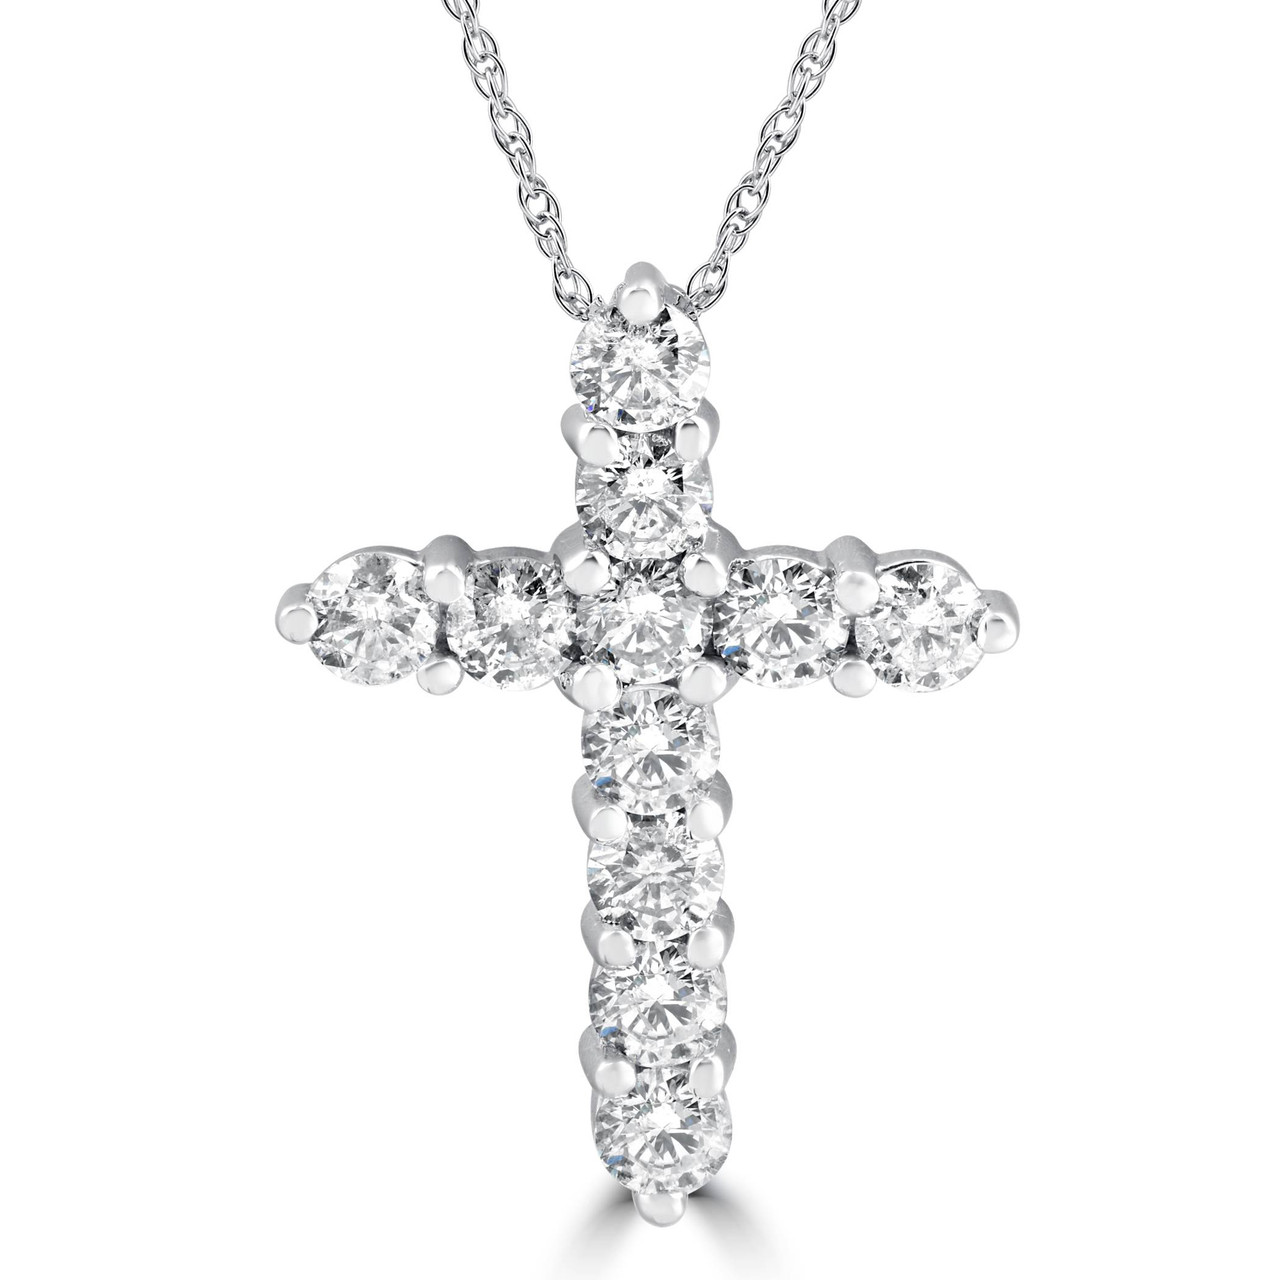 Details about   14k White Gold Diamond Cross Iced Pendant ONLY! 